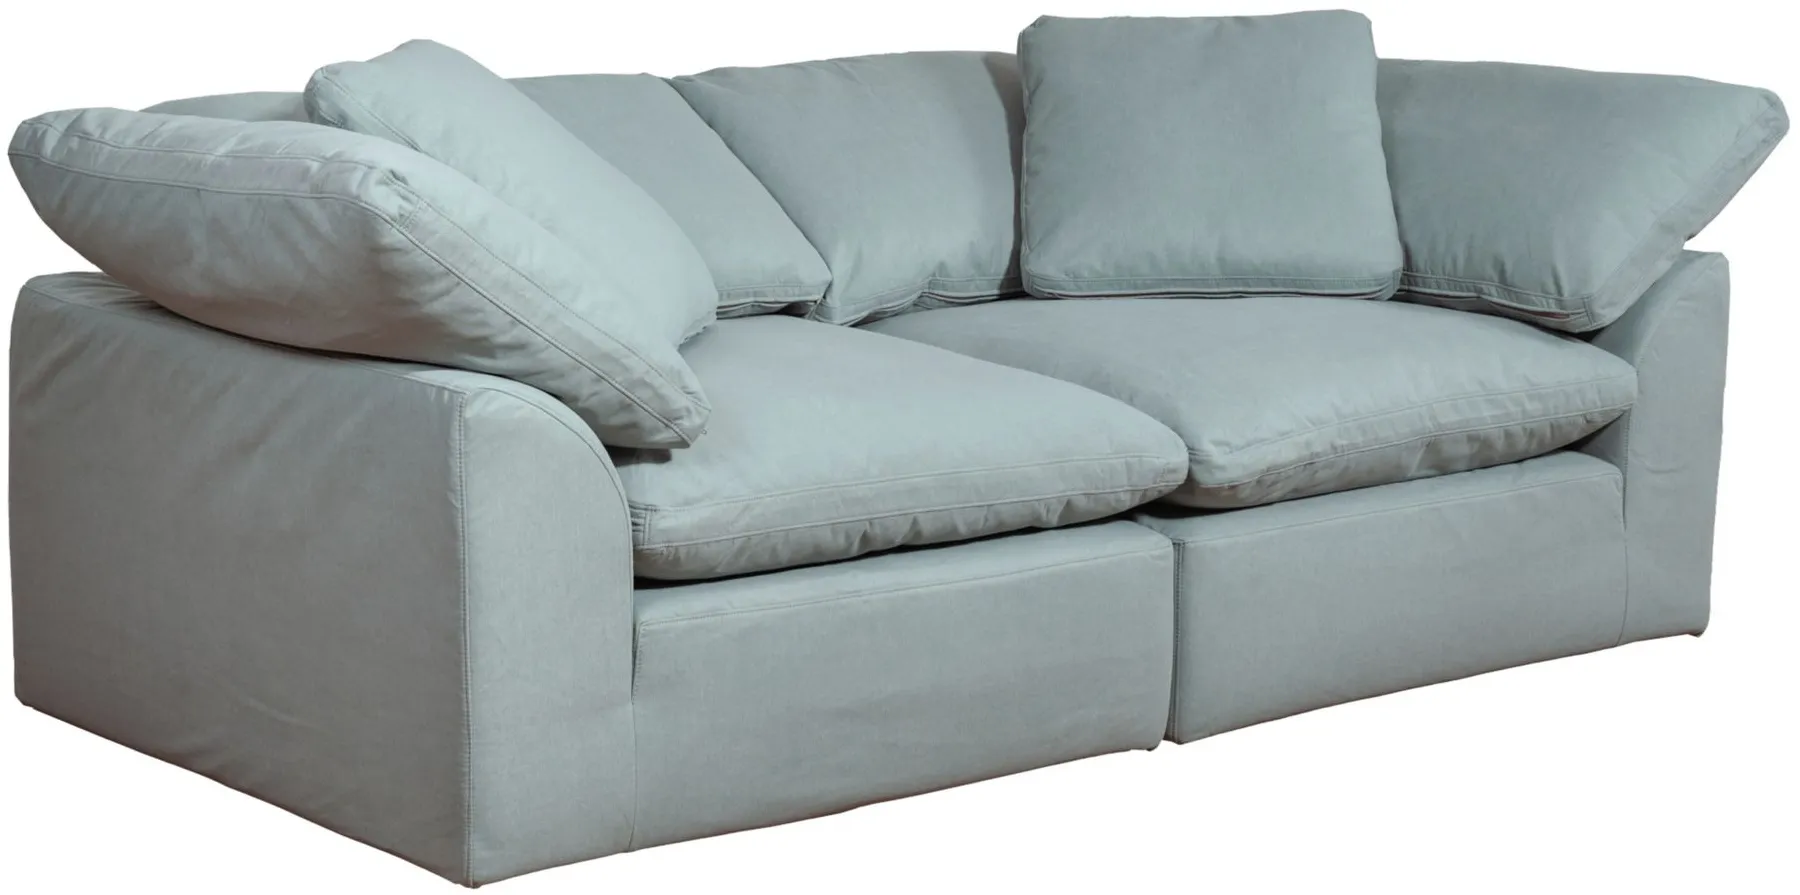 Puff Slipcover 2-pc.Sectional in Ocean Blue by Sunset Trading